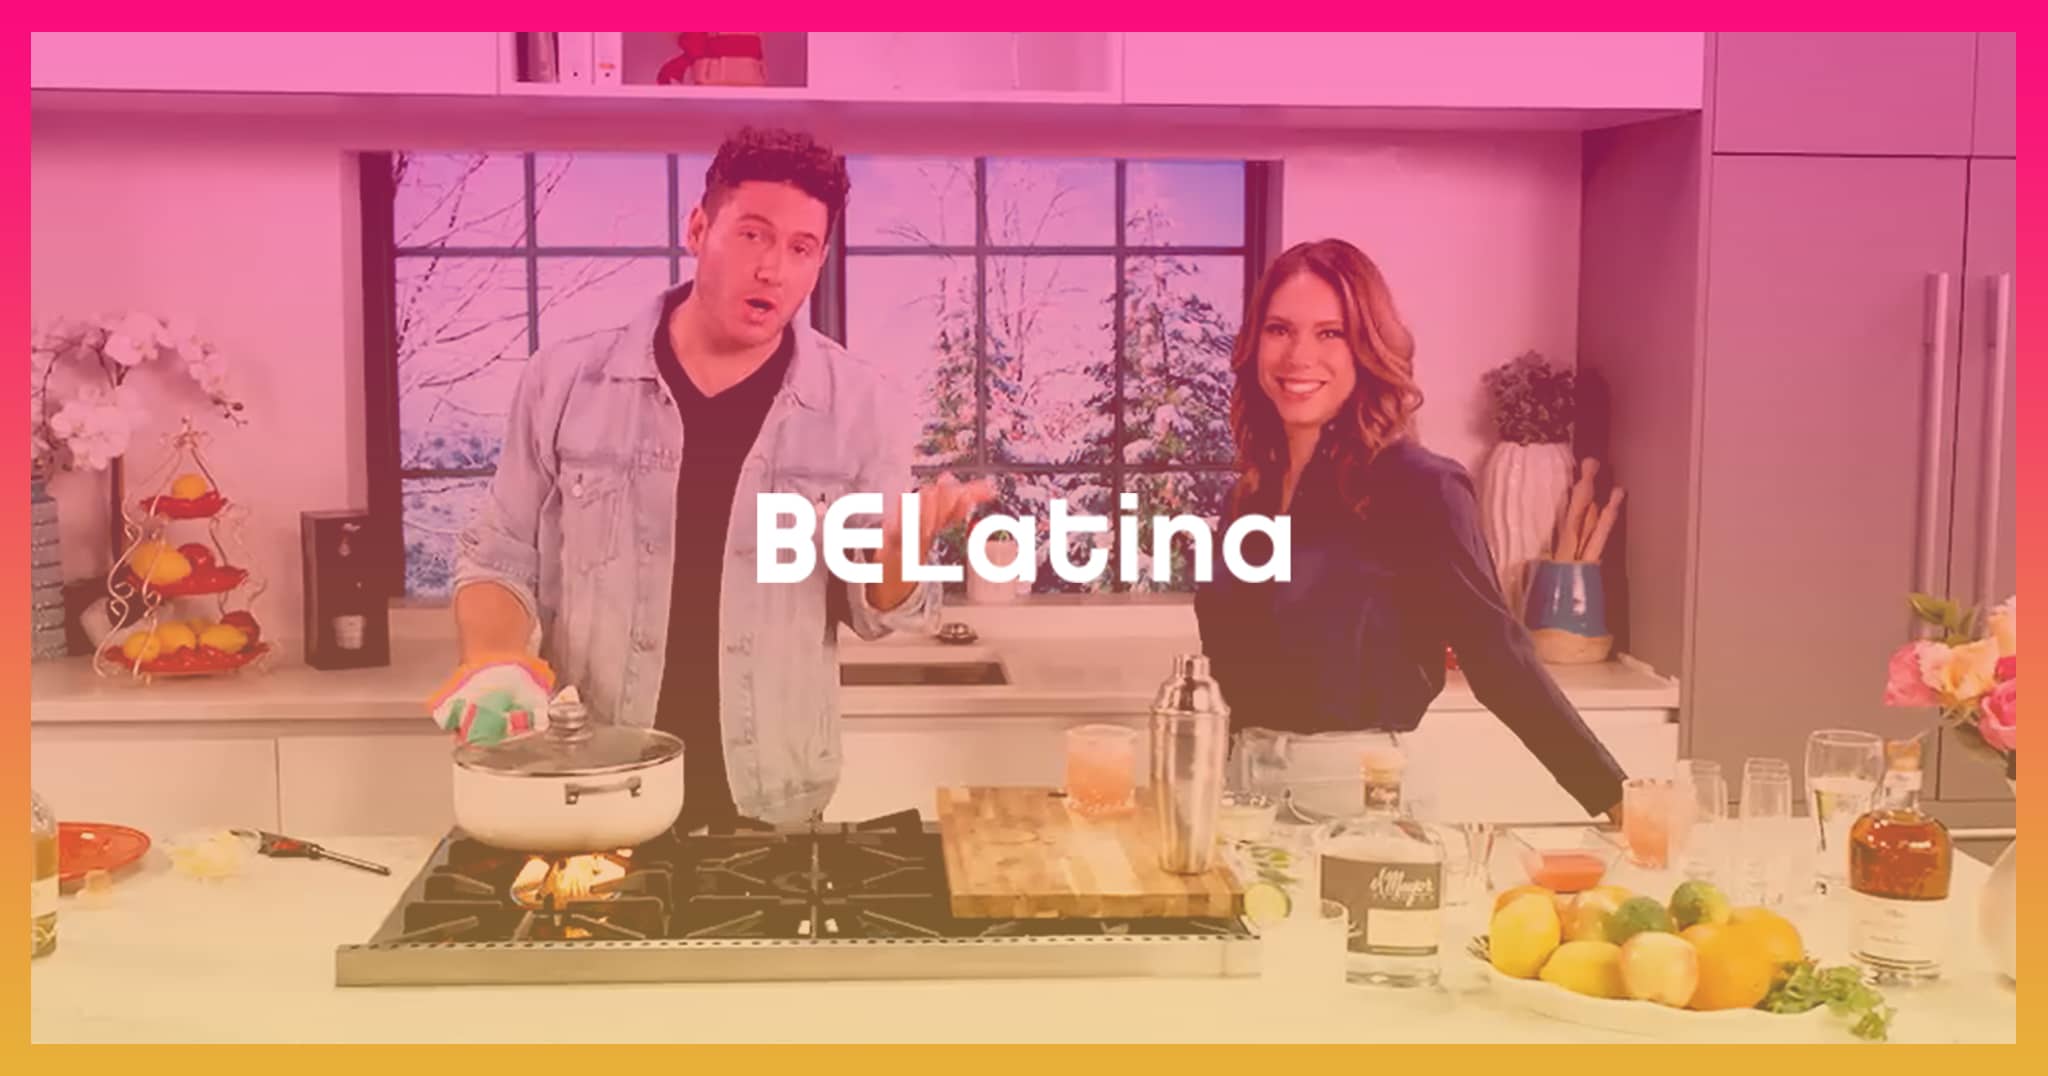 Grace Gonzalez in a kitched in front of a stove with the words BELatina over the image